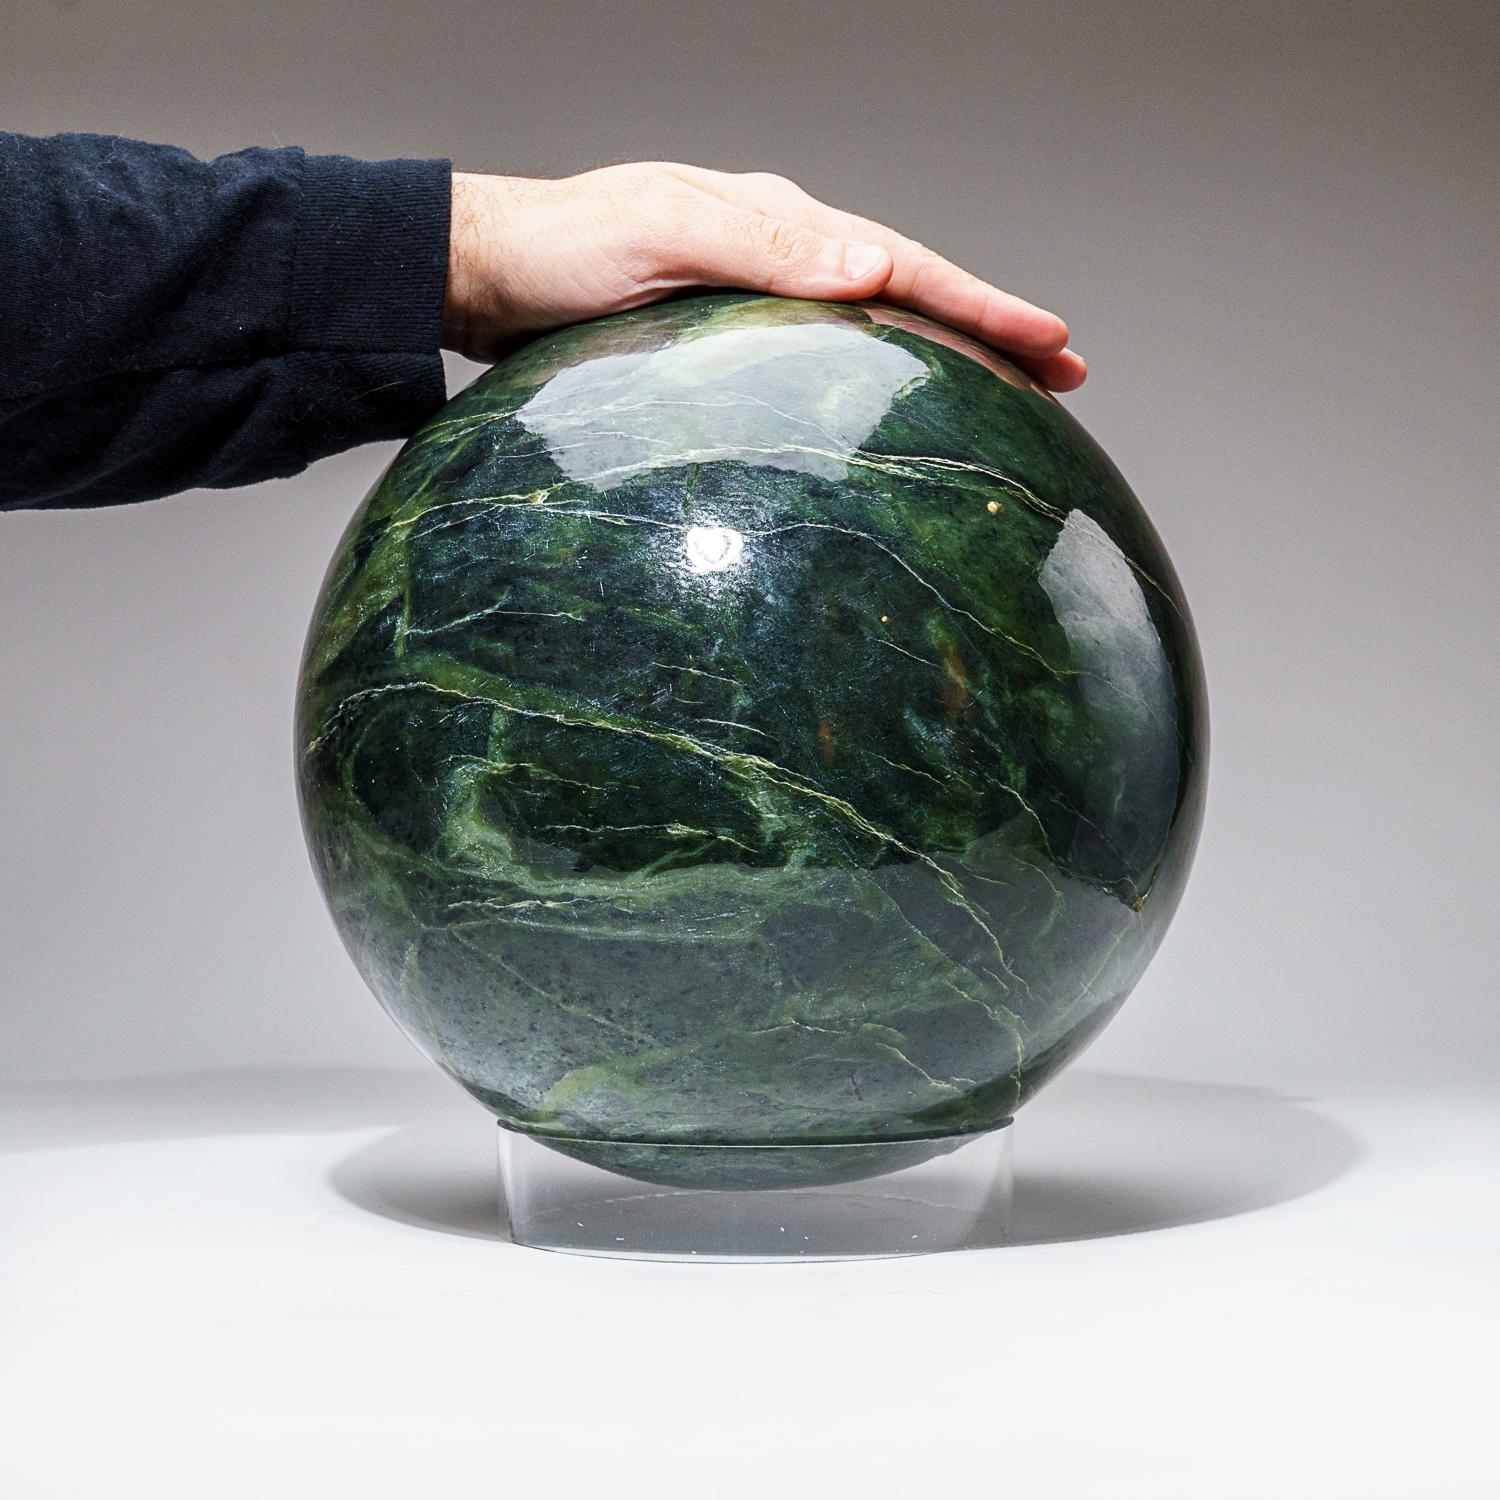 Huge, AAA-quality Nephrite Jade sphere on acrylic display stand. This beautiful piece is hand polished from a solid piece of natural Nephrite Jade. It has excellent shine, an amazing pattern and is a conversation piece in any room.

Known as the